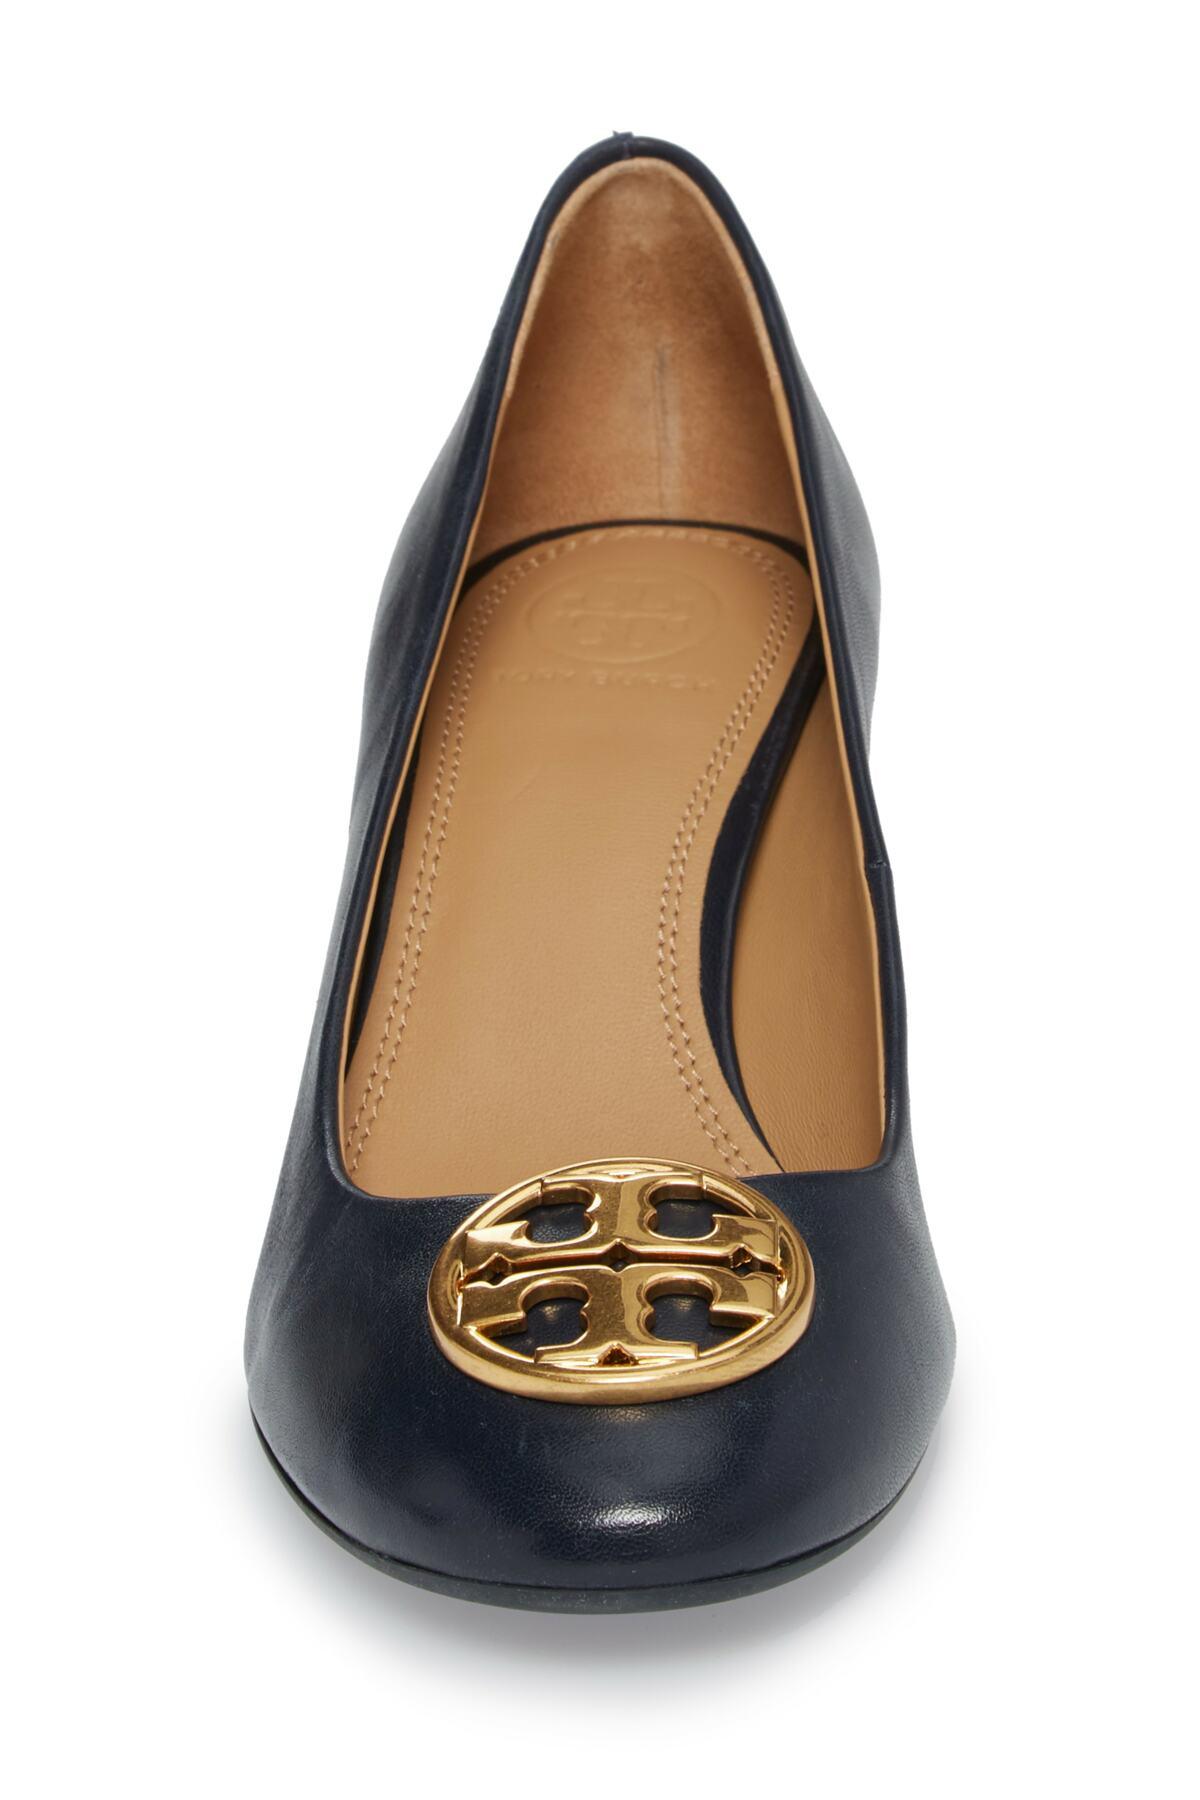 Tory Burch Chelsea 50mm Leather Pump Shoes